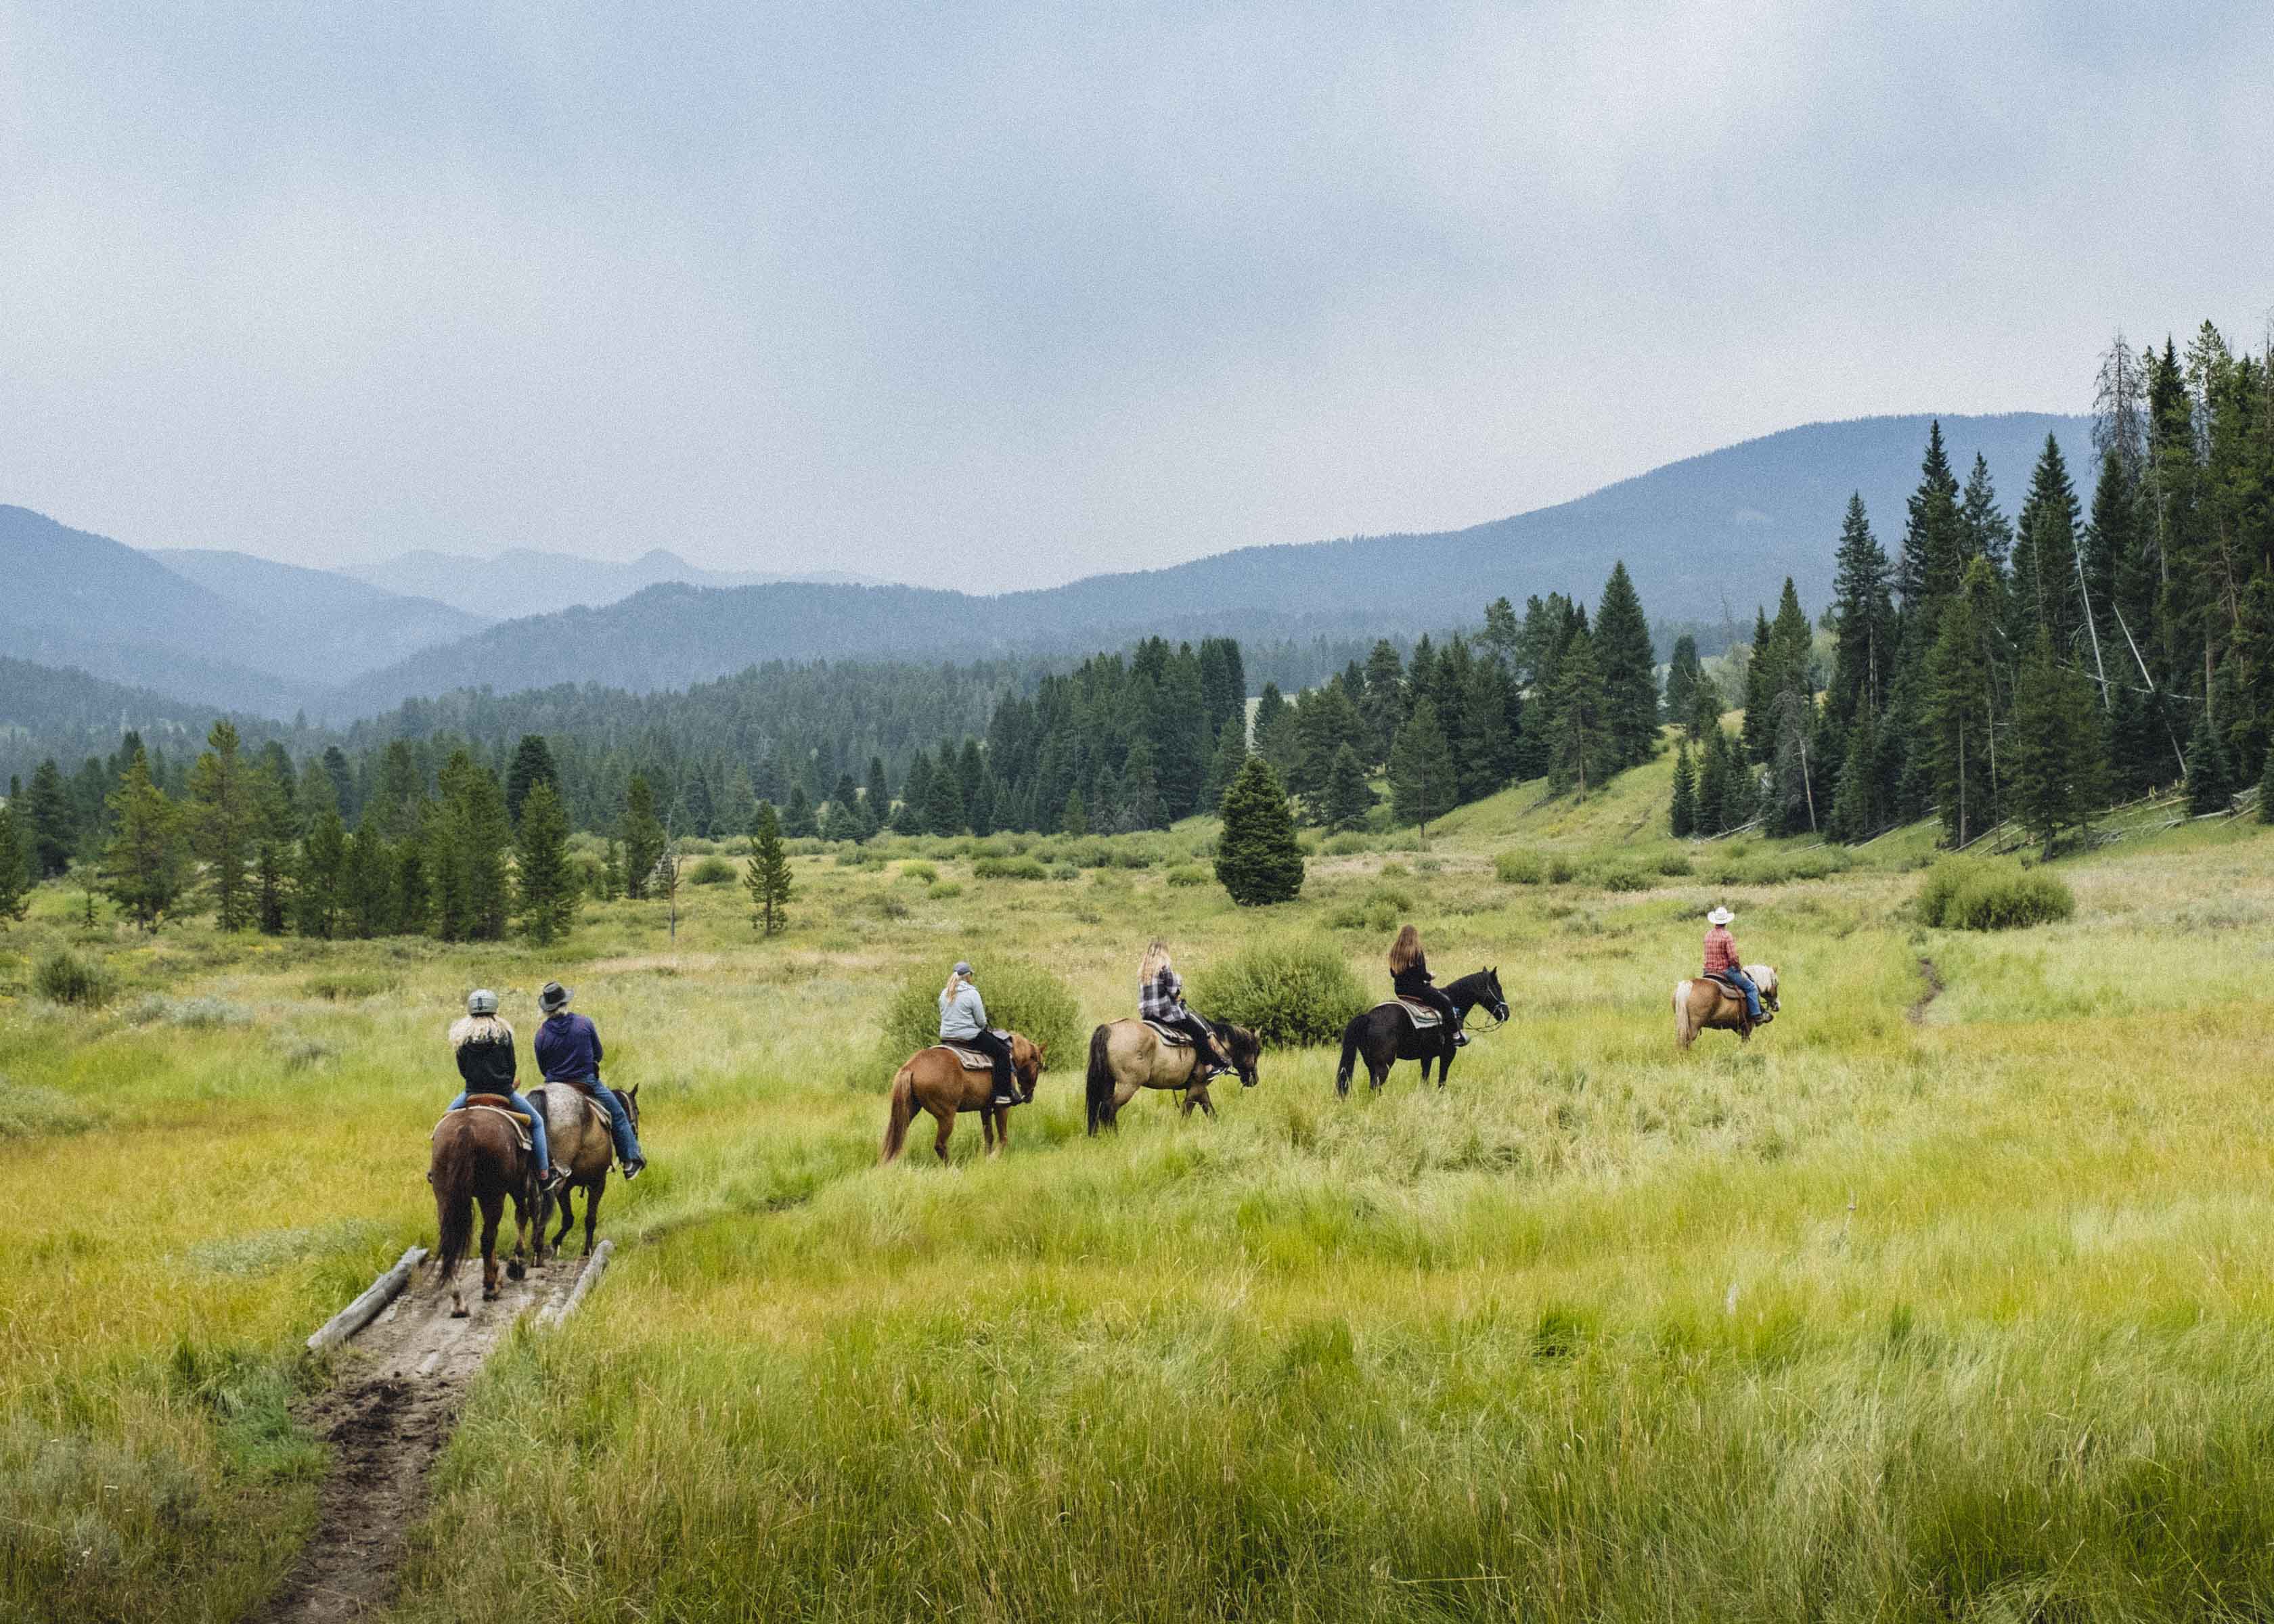 Riding horses through the Porcupine Meadows in the Custer Gallatin National Forest